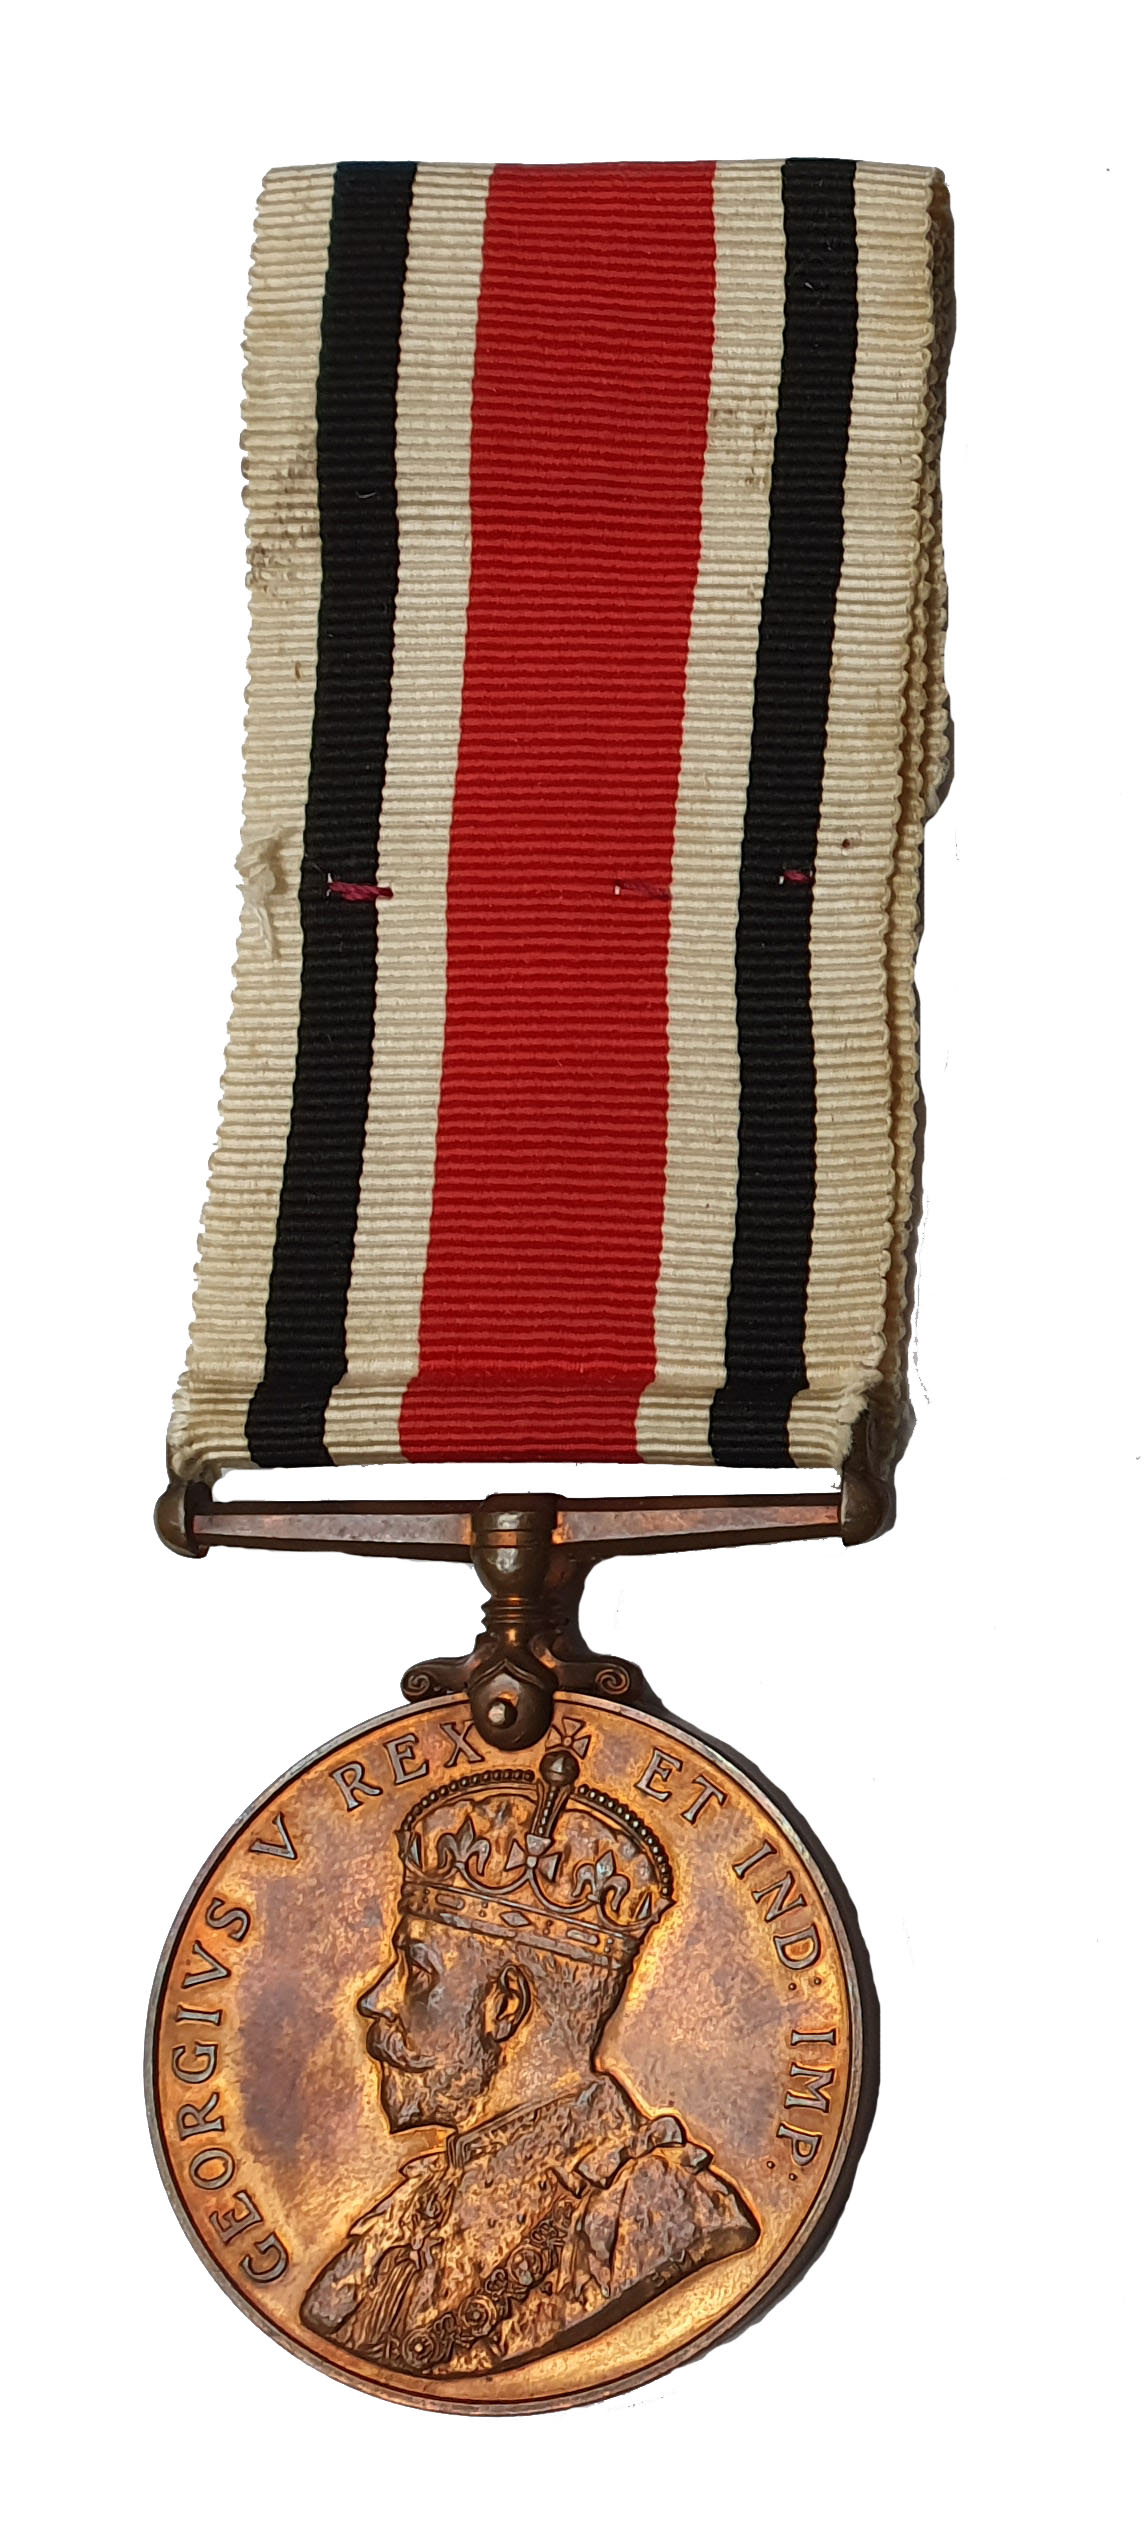 A Special Constabulary Long Service Medal, GVR, awarded to Alfred C. Horler, Somerset Constabulary